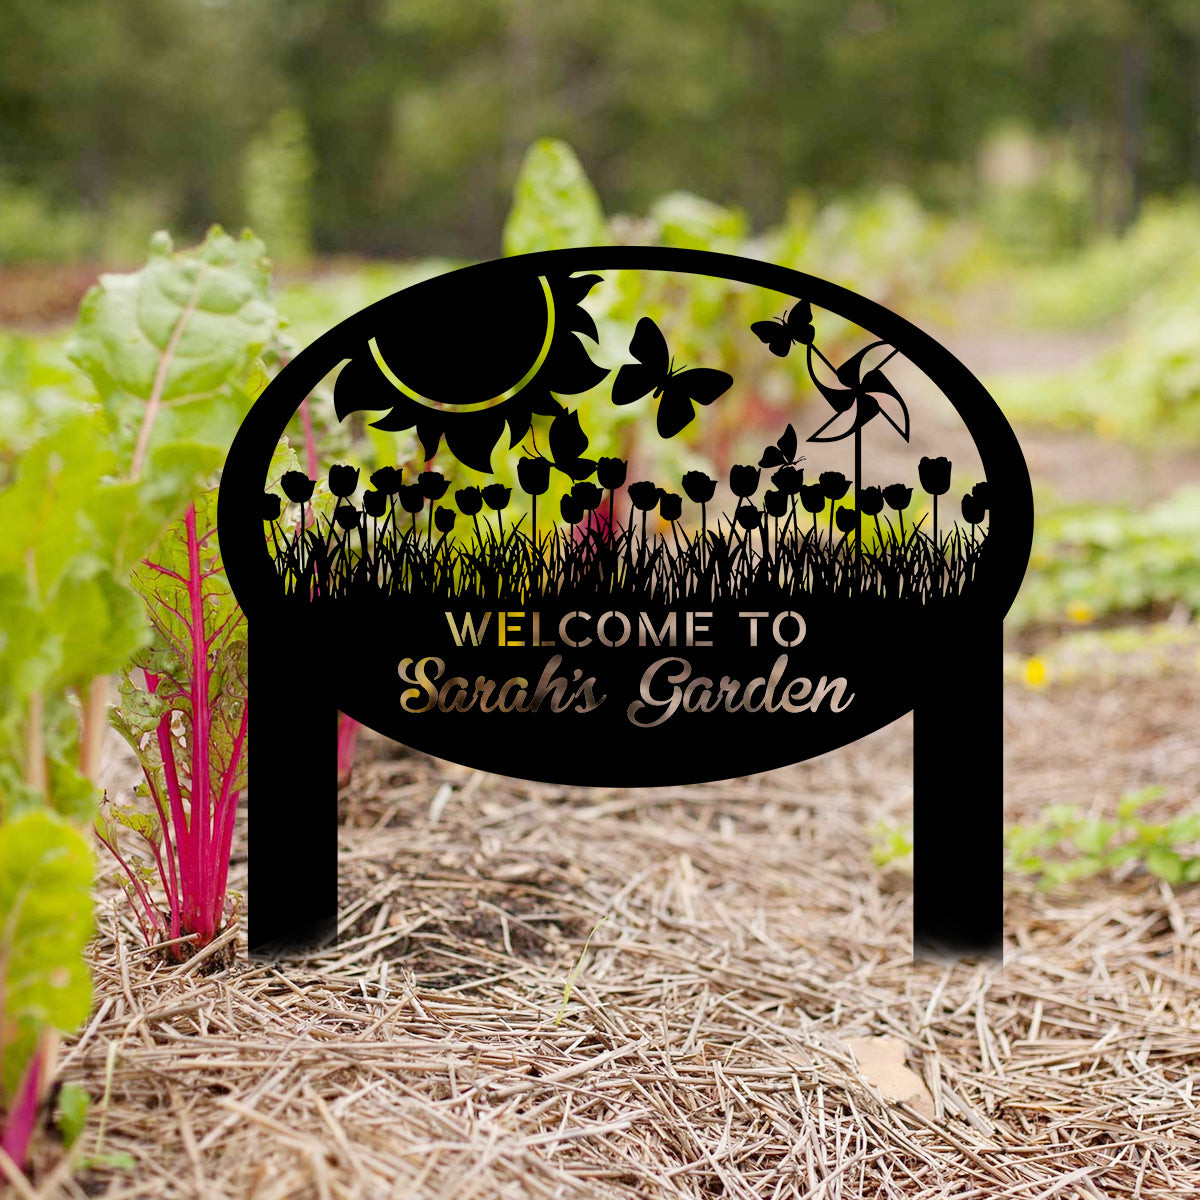 Personalized Metal Garden Sign, Outdoor Garden Stake, Home Decor, Metal Laser Cut Metal Signs Custom Gift Ideas 14x14IN